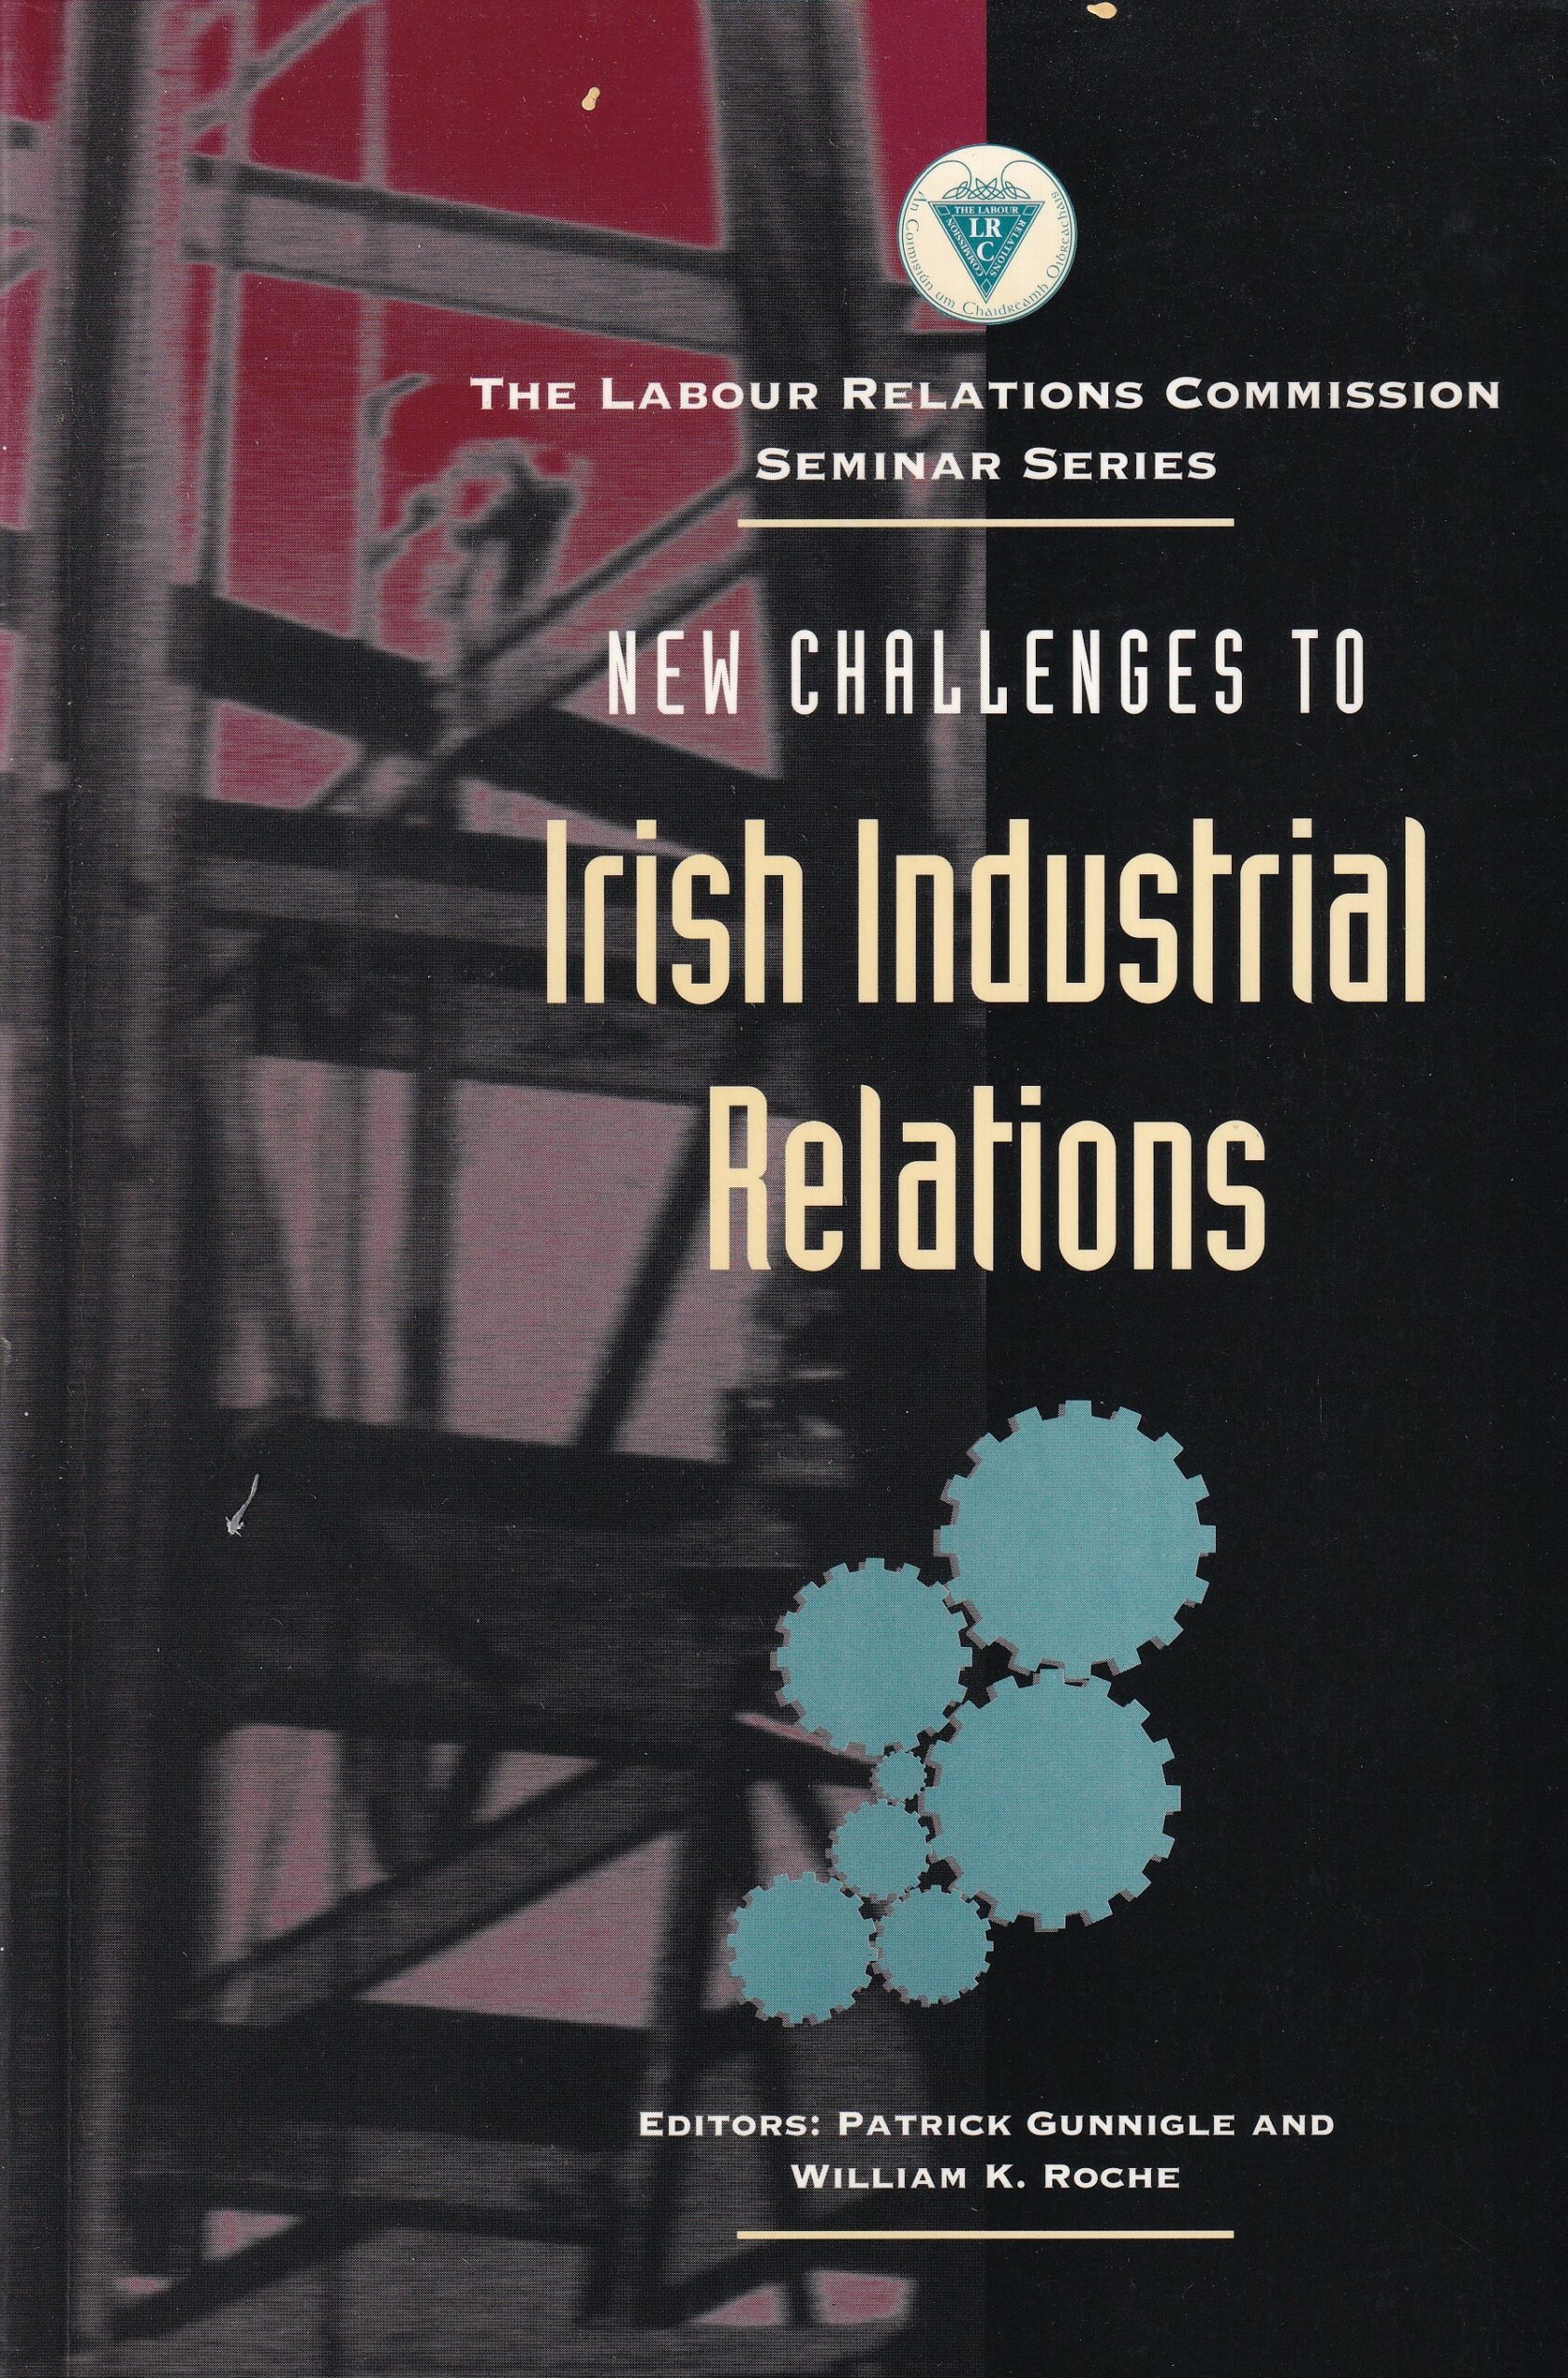 New Challenges to Irish Industrial Relations | Patrick Gunnigle and William K. Roche (eds) | Charlie Byrne's